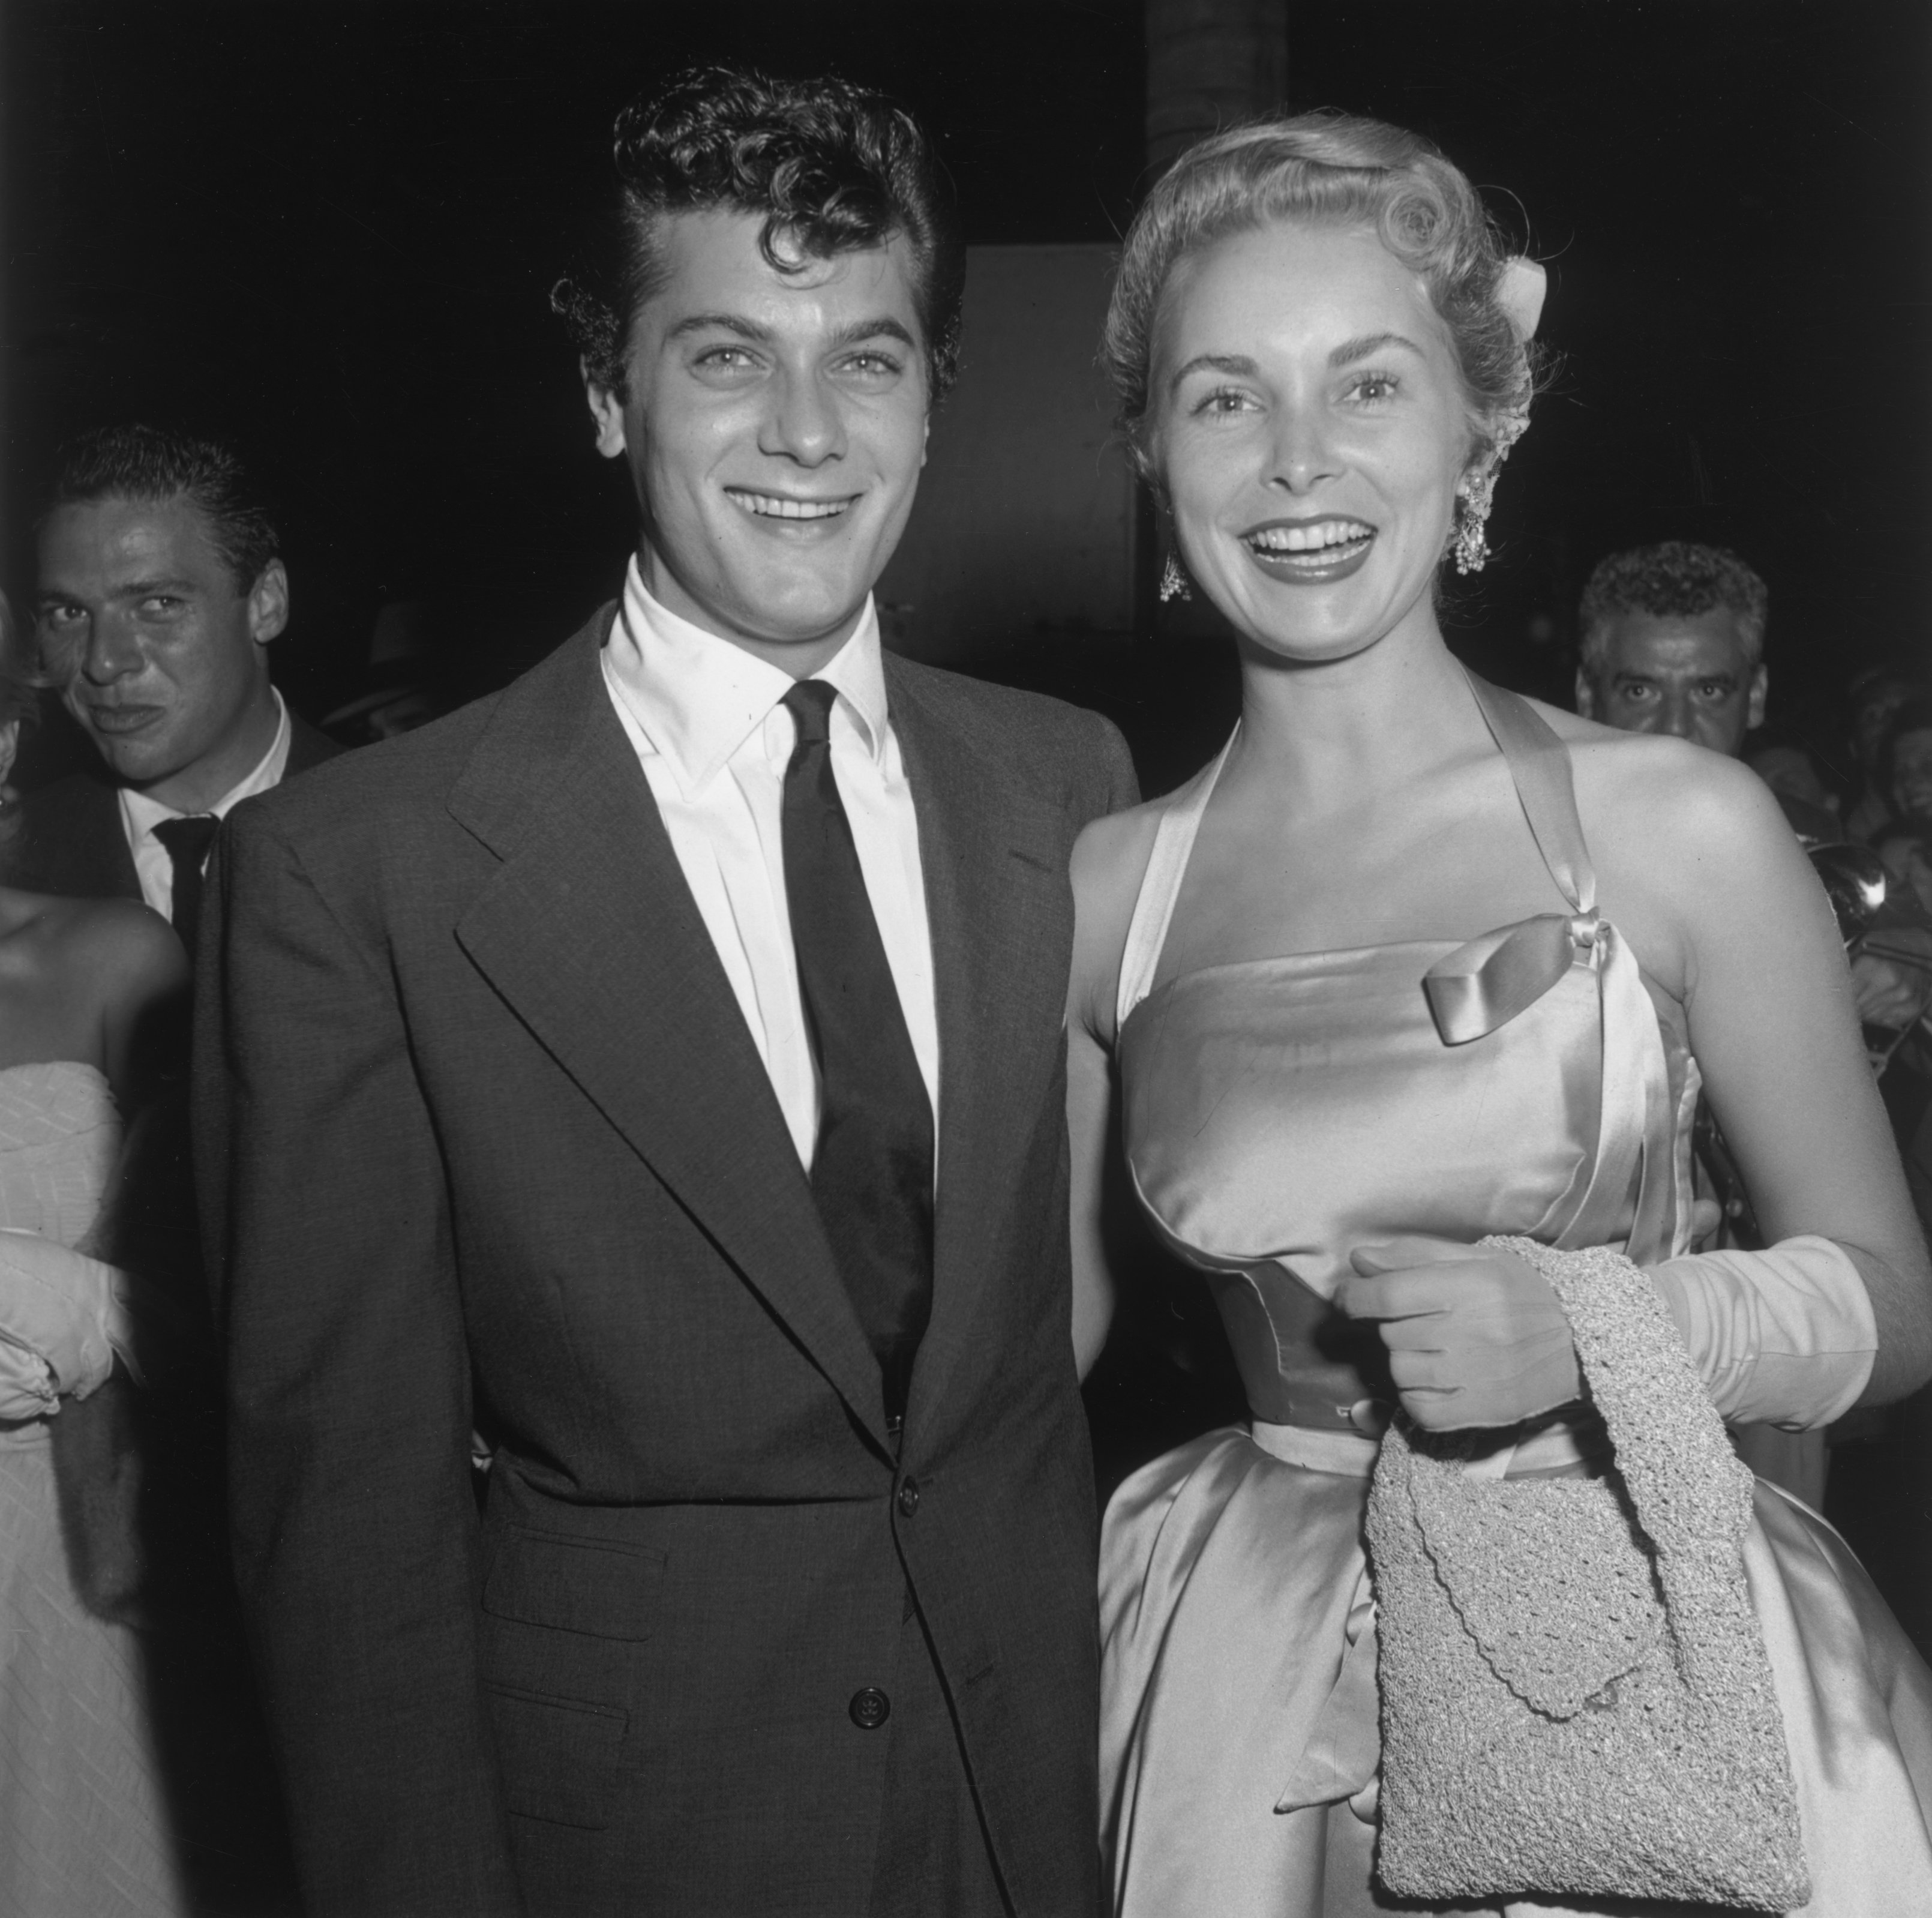 Tony Curtis and Janet Leigh smile as they attend the premiere of director Elia Kazan's 1951 film, 'A Streetcar Named Desire,' Hollywood, California | Photo: Getty Images